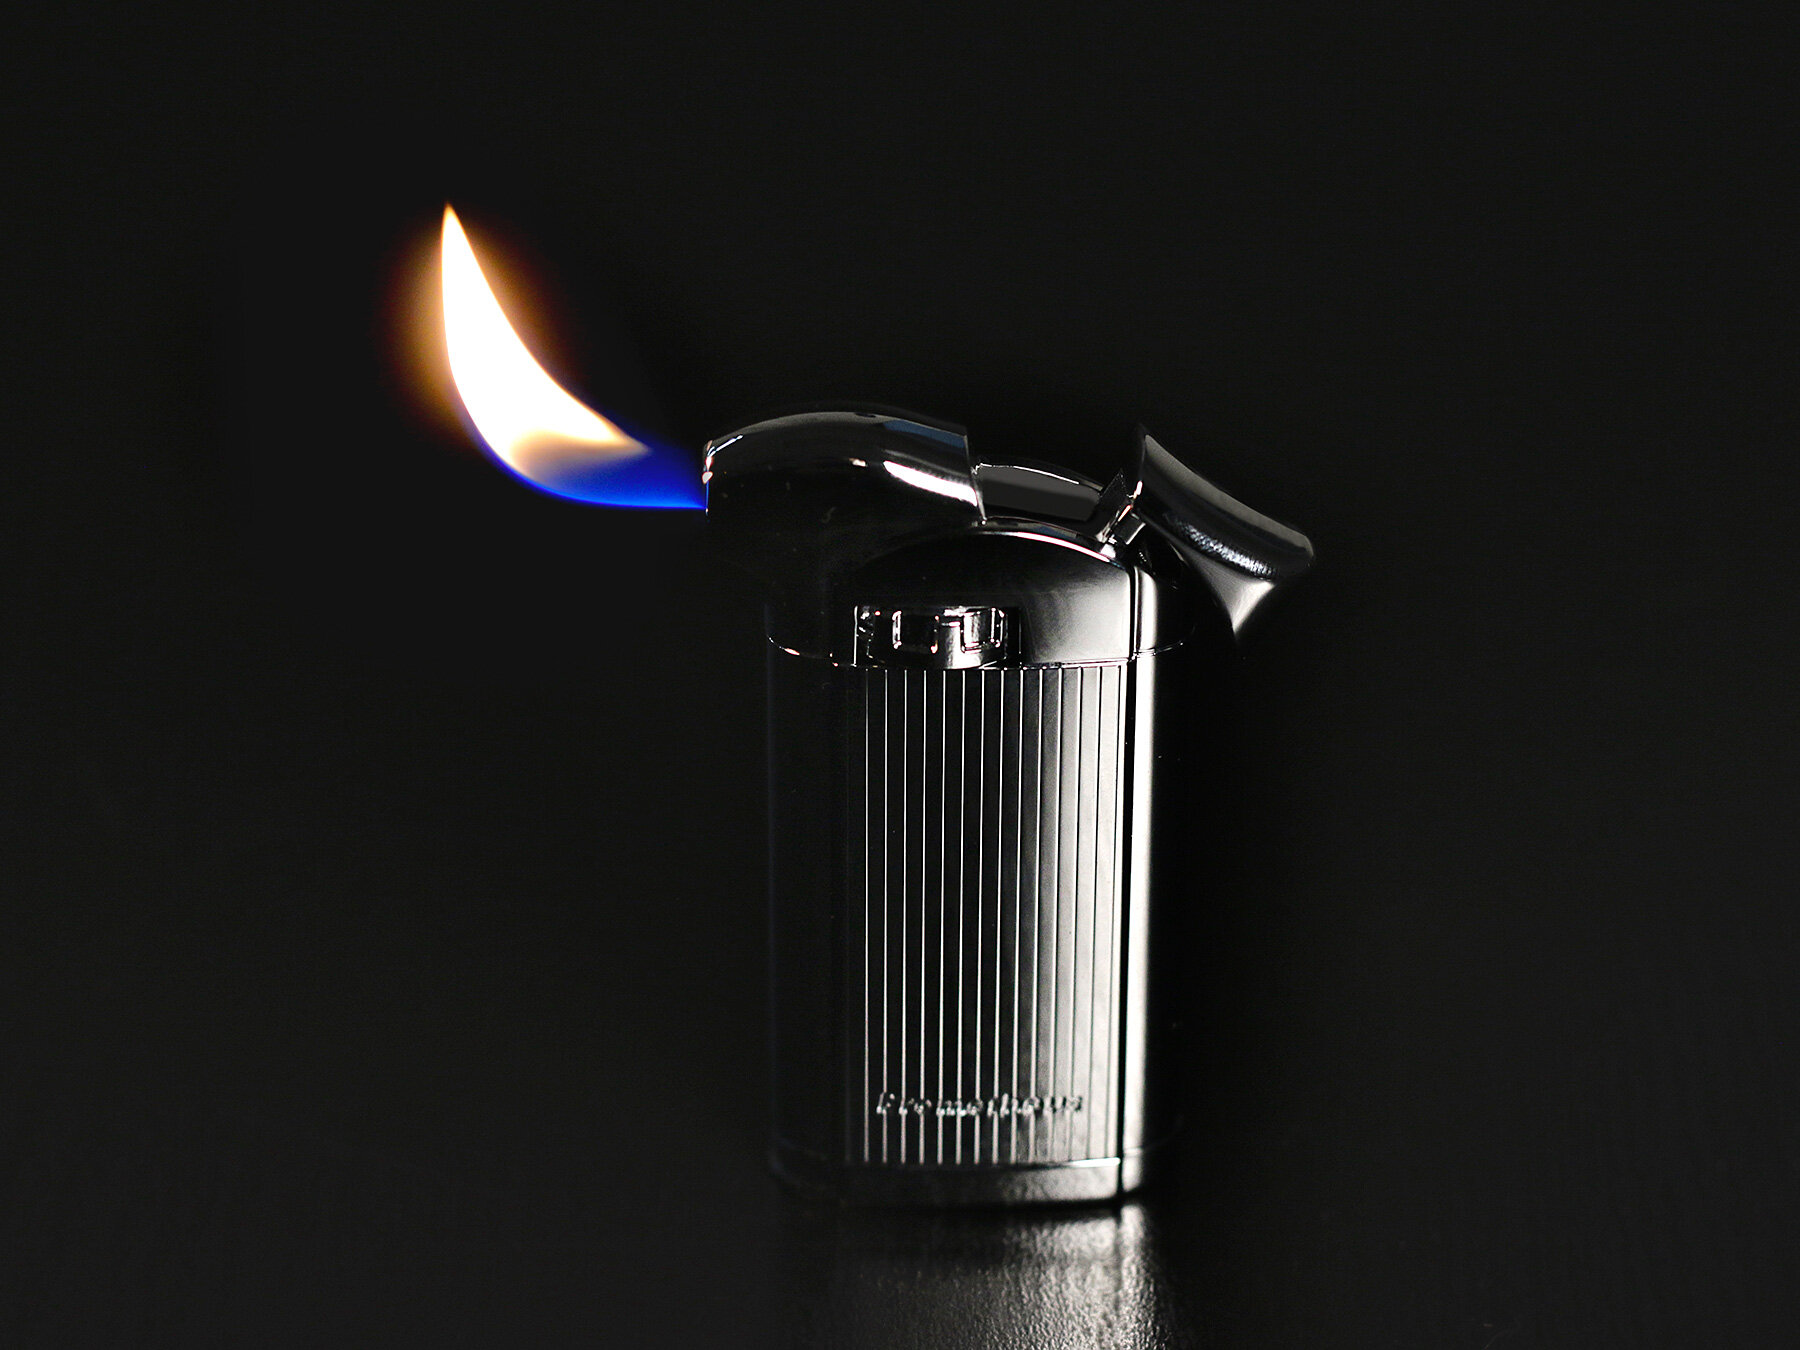 Double Flame Lighter's Jet Flame Soft Flame Quality 